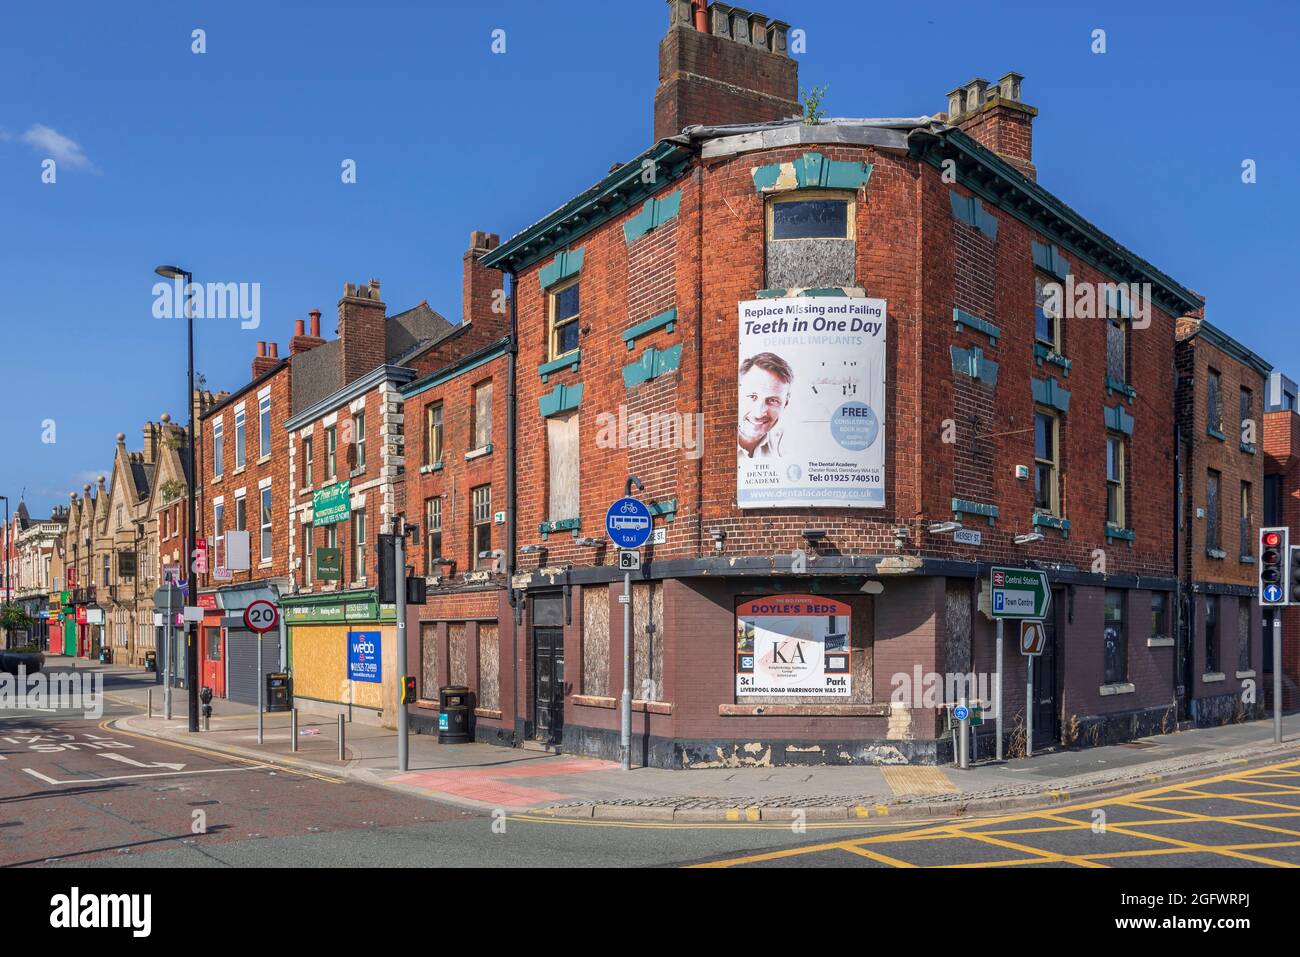 Closed and shuttered haigh street in Warrington. Stock Photo